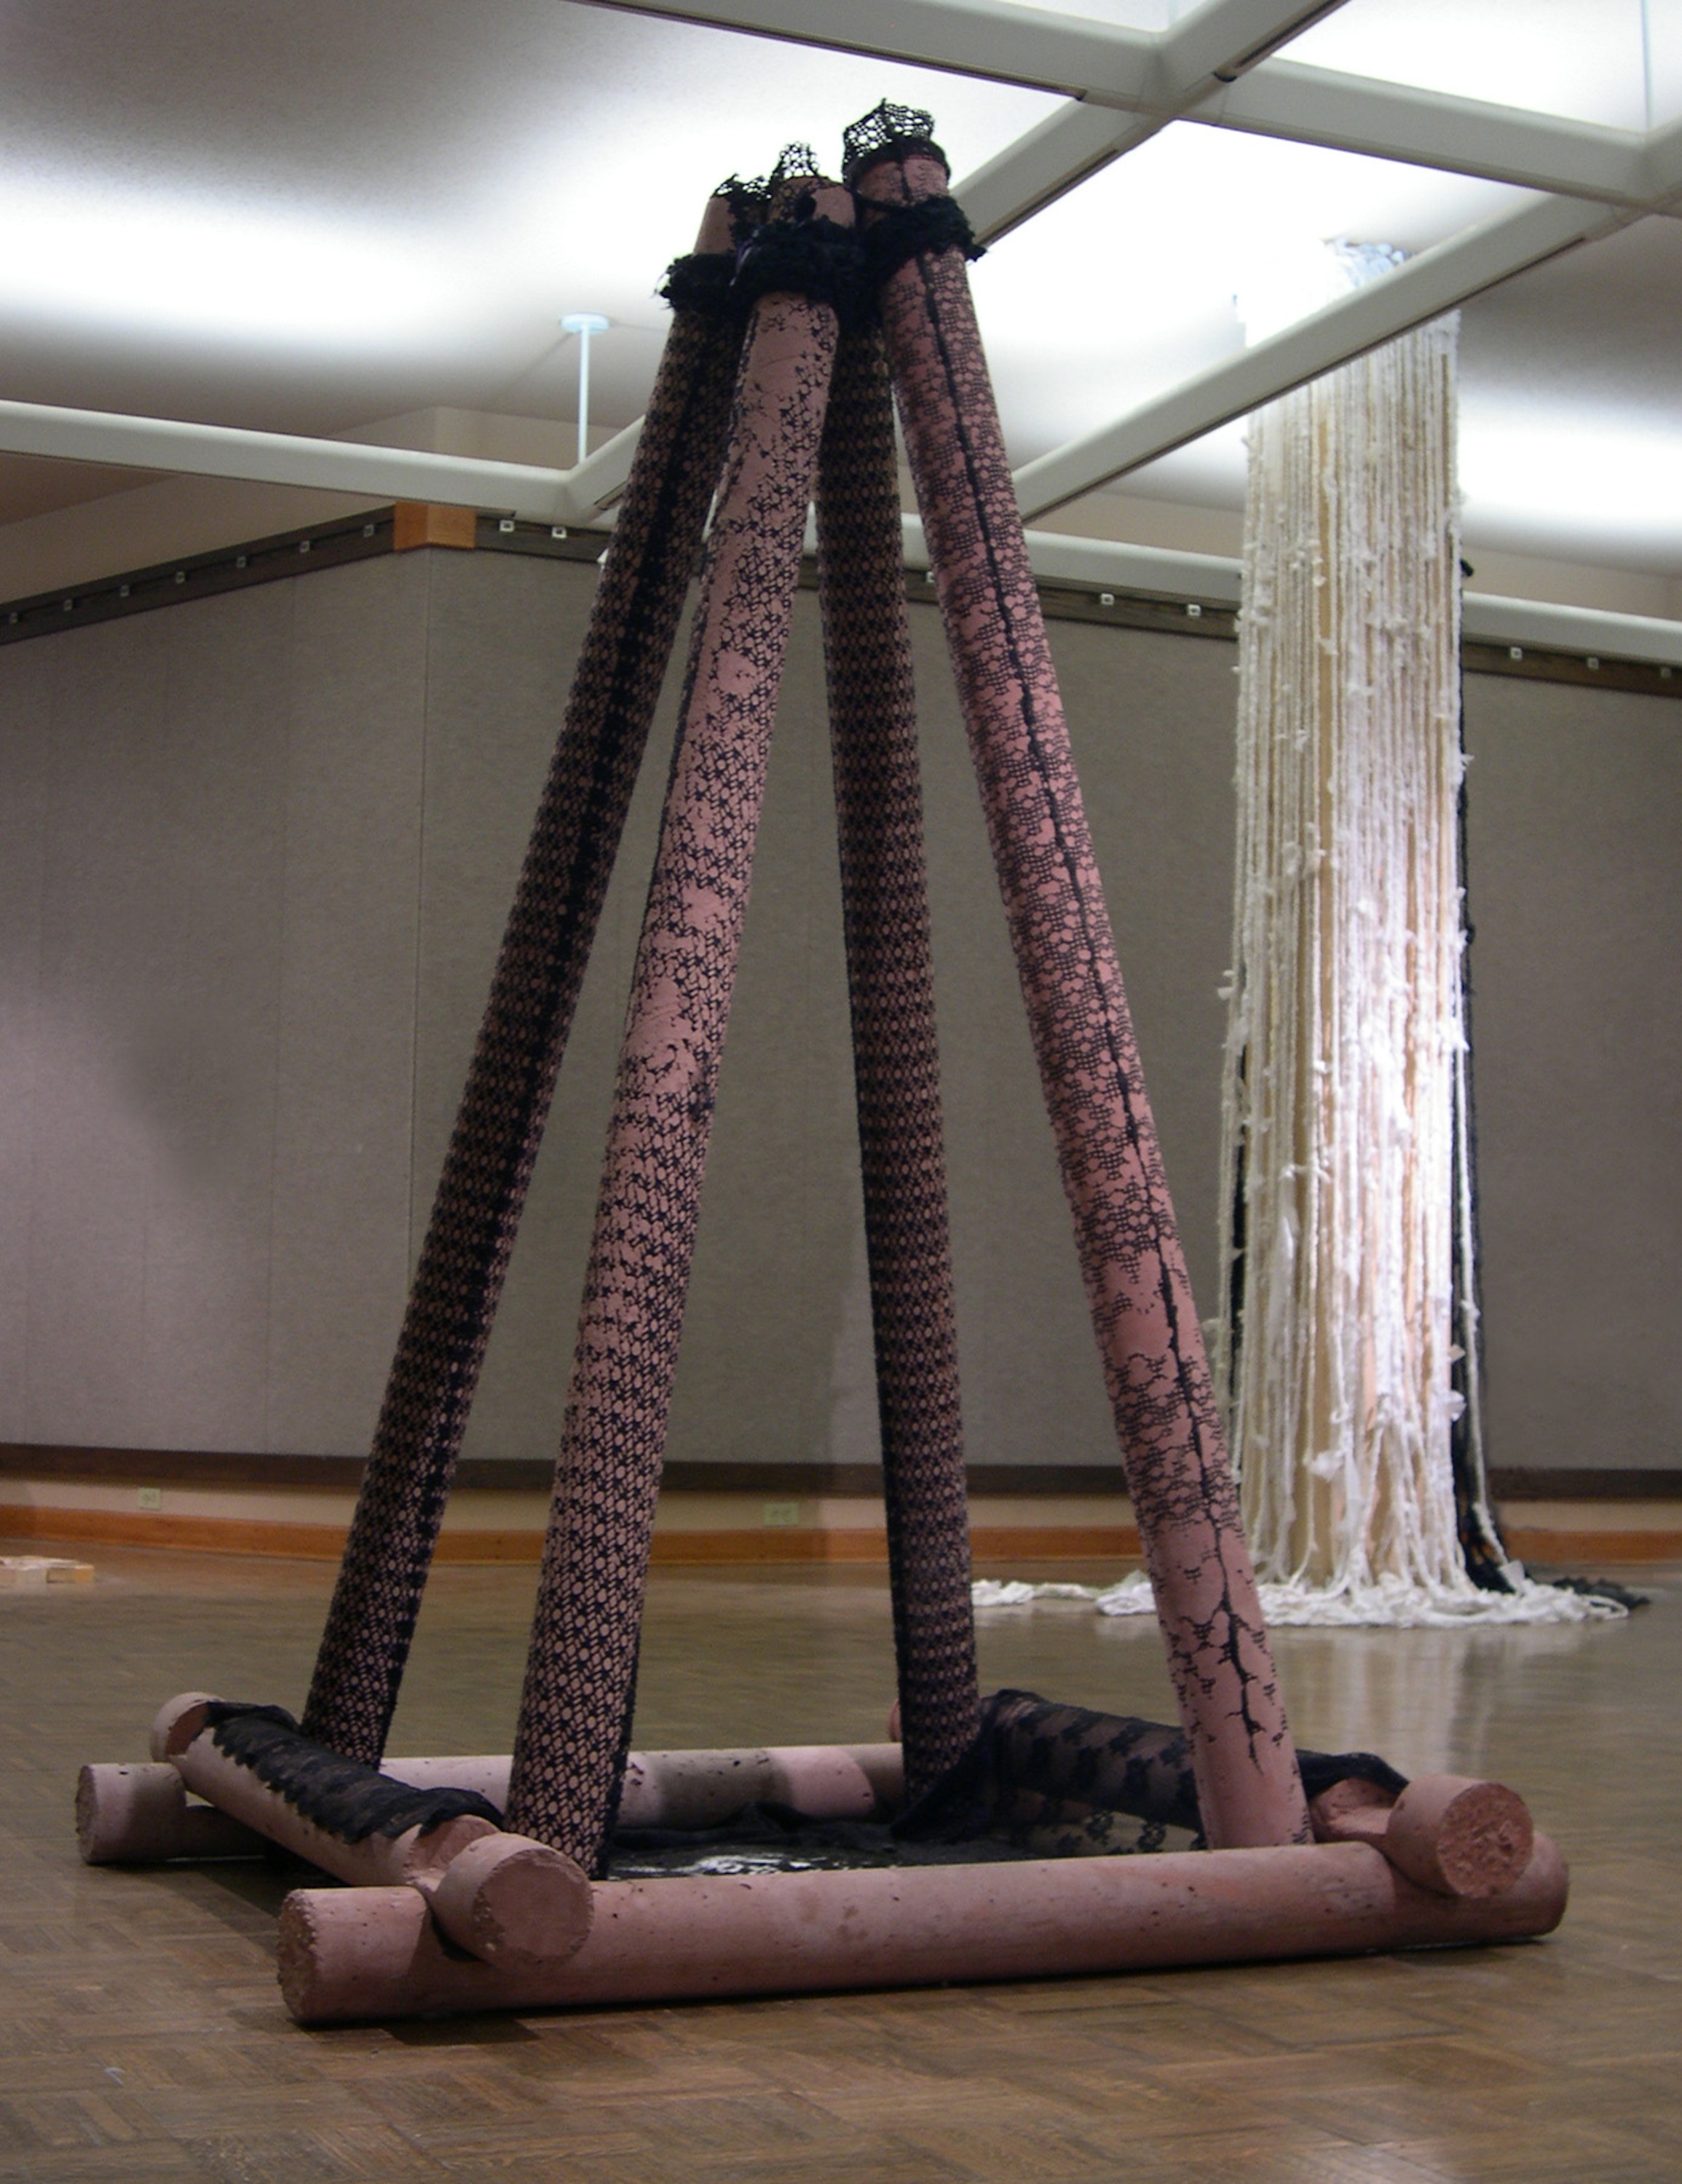   Upright , 2008 Cast cement, lace and braided silk, 82x36x36 inches 